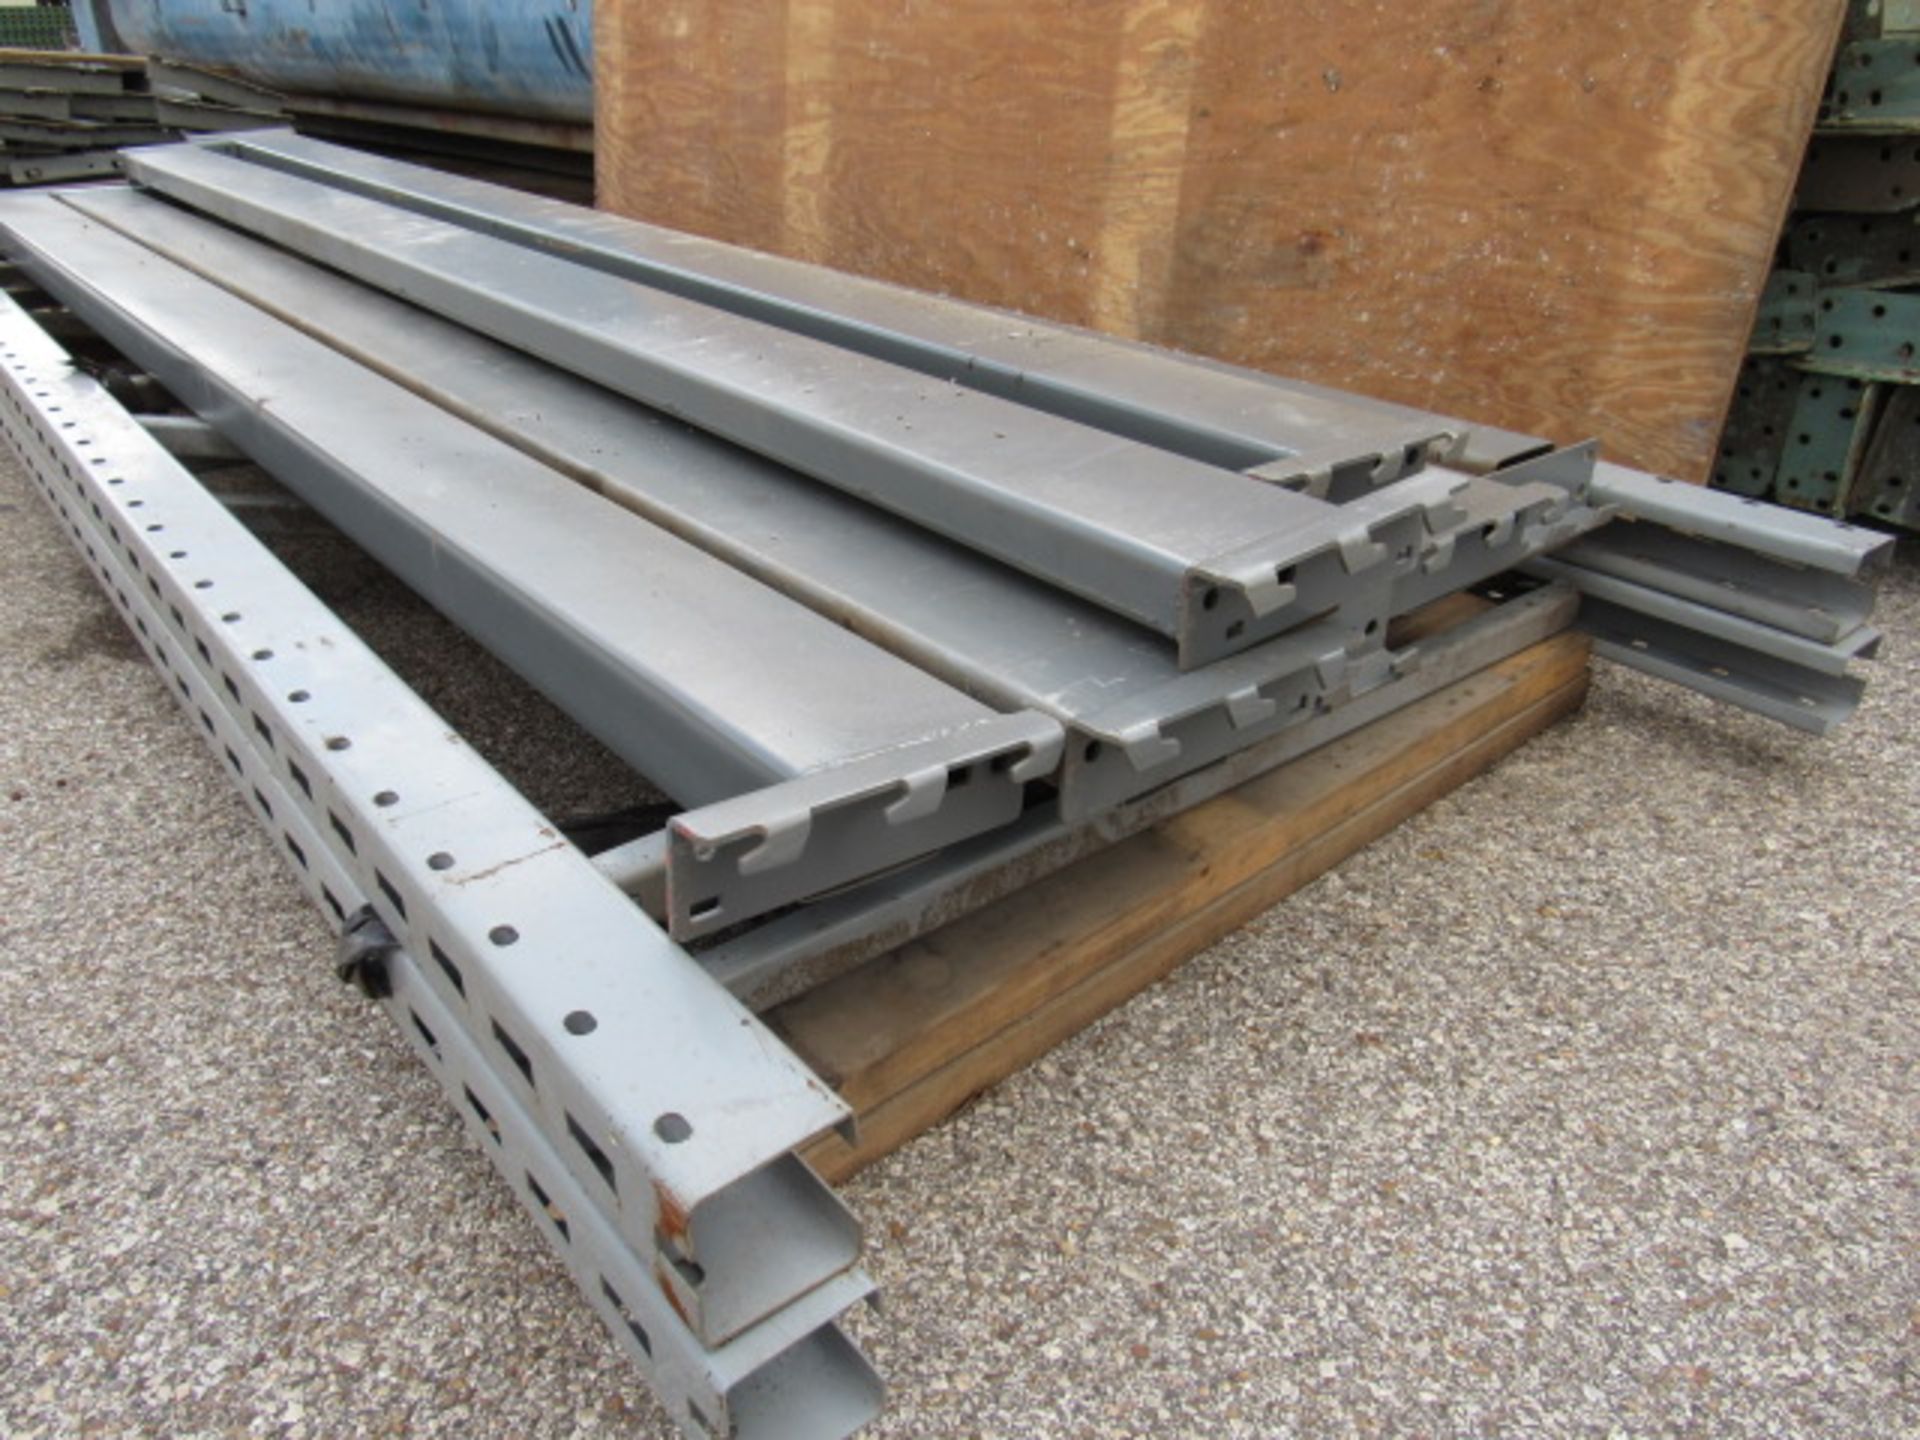 Lot of Pallet Racks with Uprights and Cross Beams - Image 12 of 14